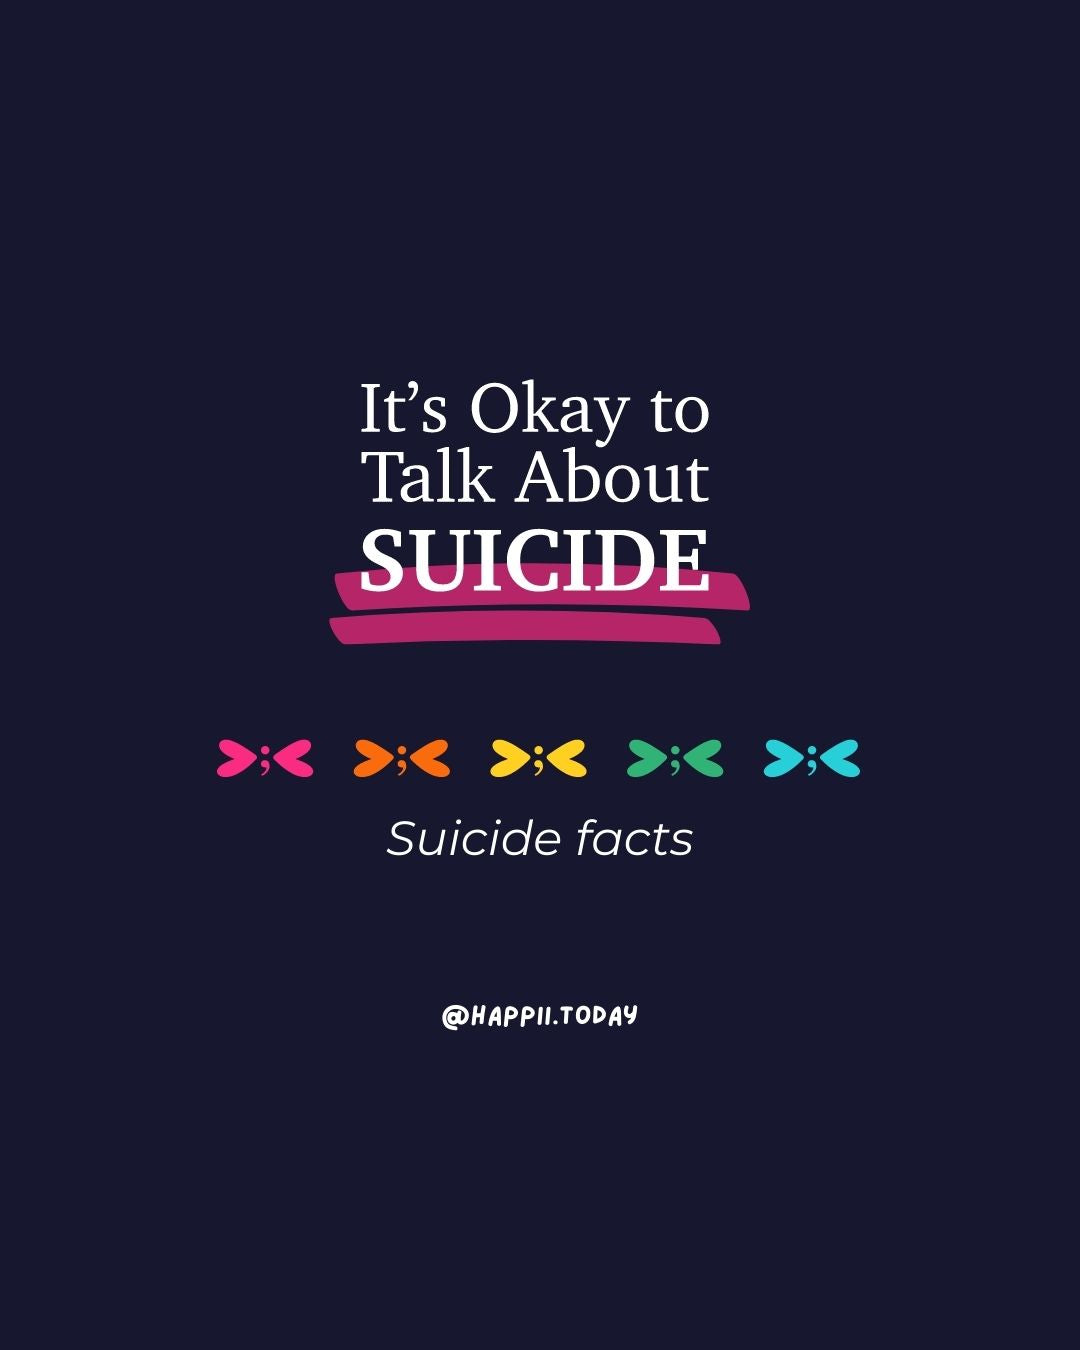 Its Okay To Talk About Suicide - Suicide Facts